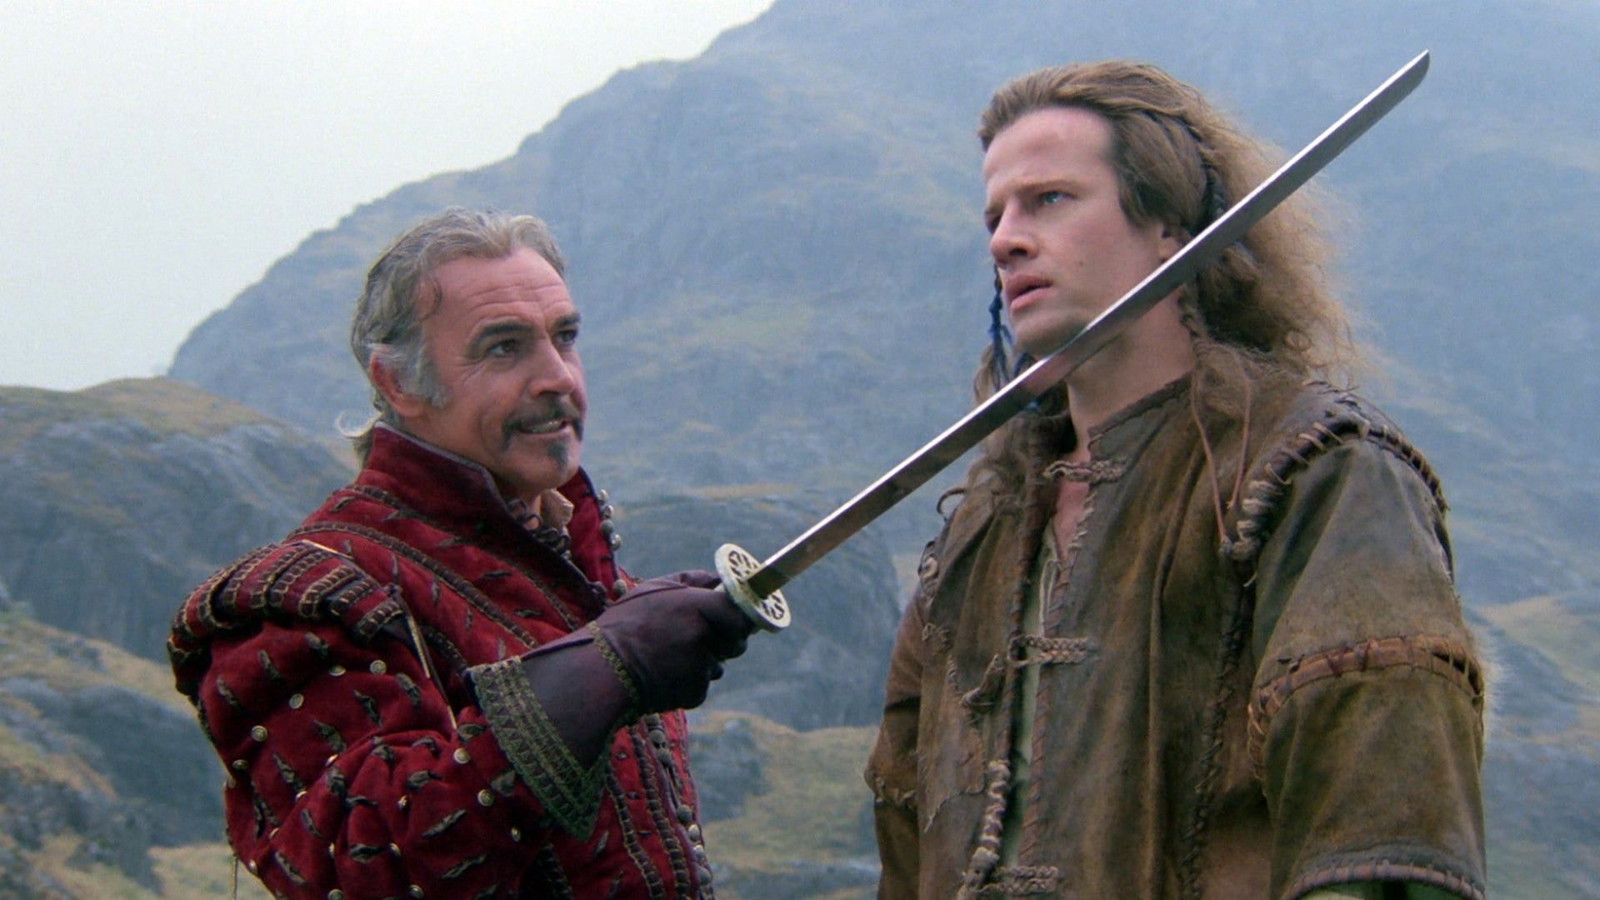 Christopher Lambert and Sean Connery in “Highlander” from 1984 |  20th Century Fox